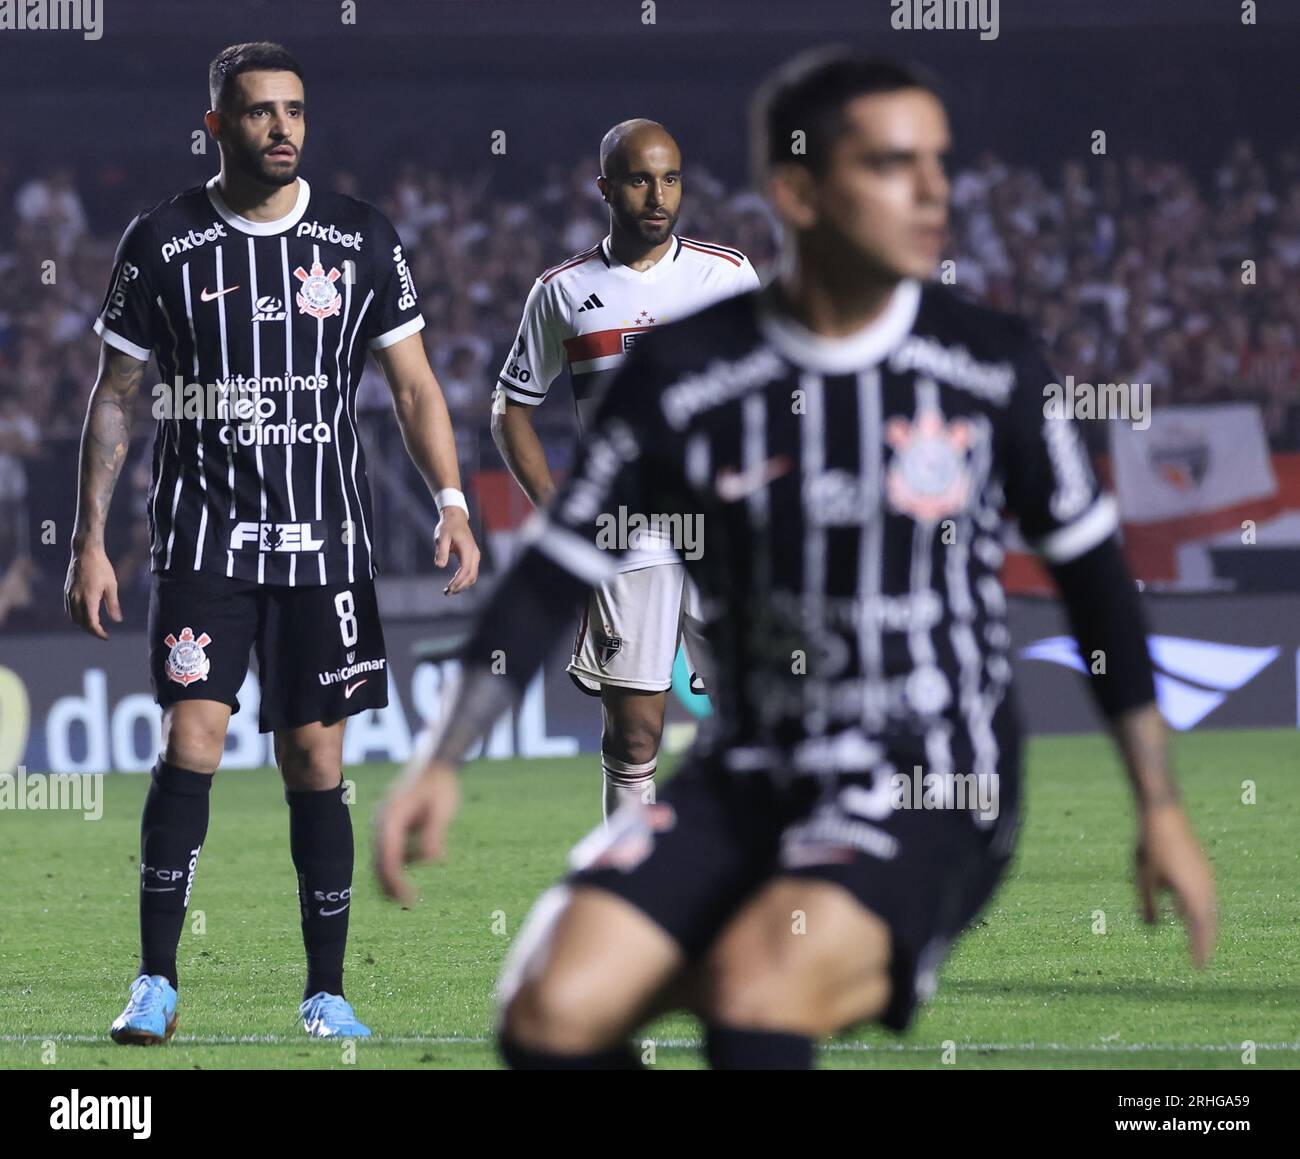 Sao Paulo, Brazil. 16th Aug, 2023. SP - SAO PAULO - 08/16/2023 - COPA DO BRASIL 2023, SAO PAULO X CORINTHIANS - Lucas Moura player from Sao Paulo competes with Renato Augusto player from Corinthians during a match at Morumbi stadium for the 2023 Copa do Brasil championship. Photo: Marcello Zambrana/AGIF Credit: AGIF/Alamy Live News Stock Photo